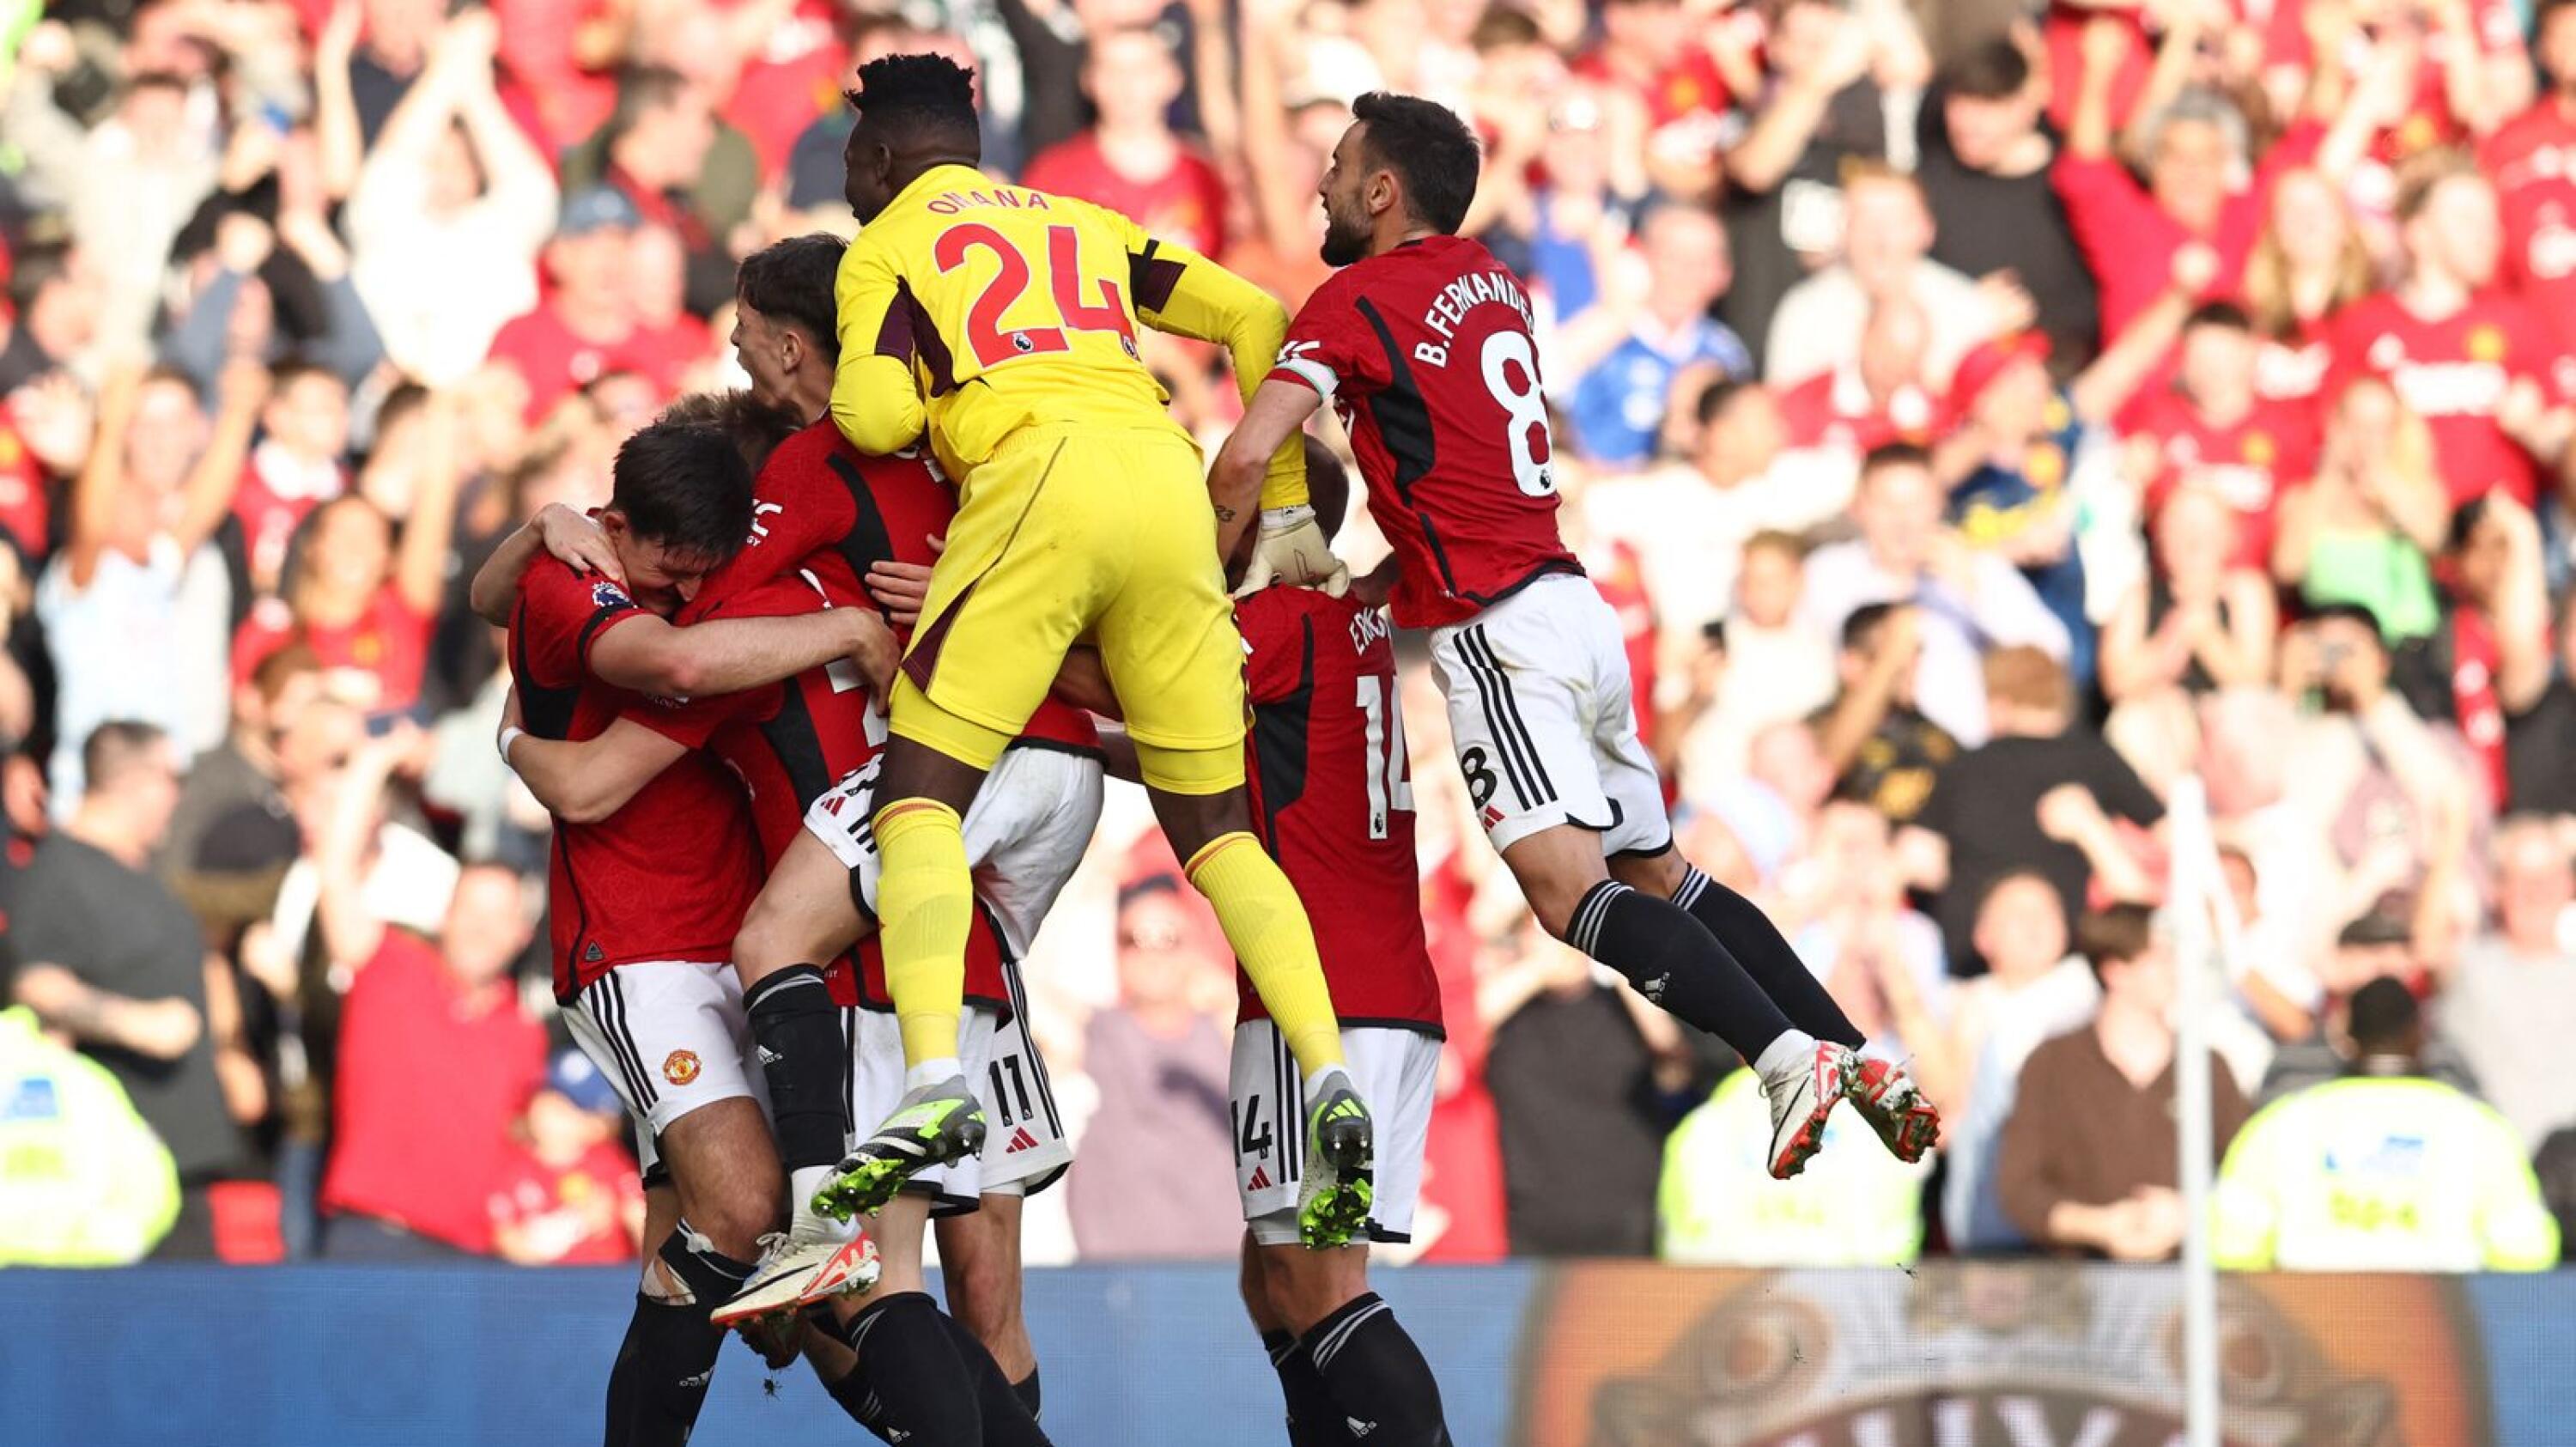 Manchester United's Scott McTominay celebrates with teammates after scoring the winning goal during their Premier League clash against Brentford